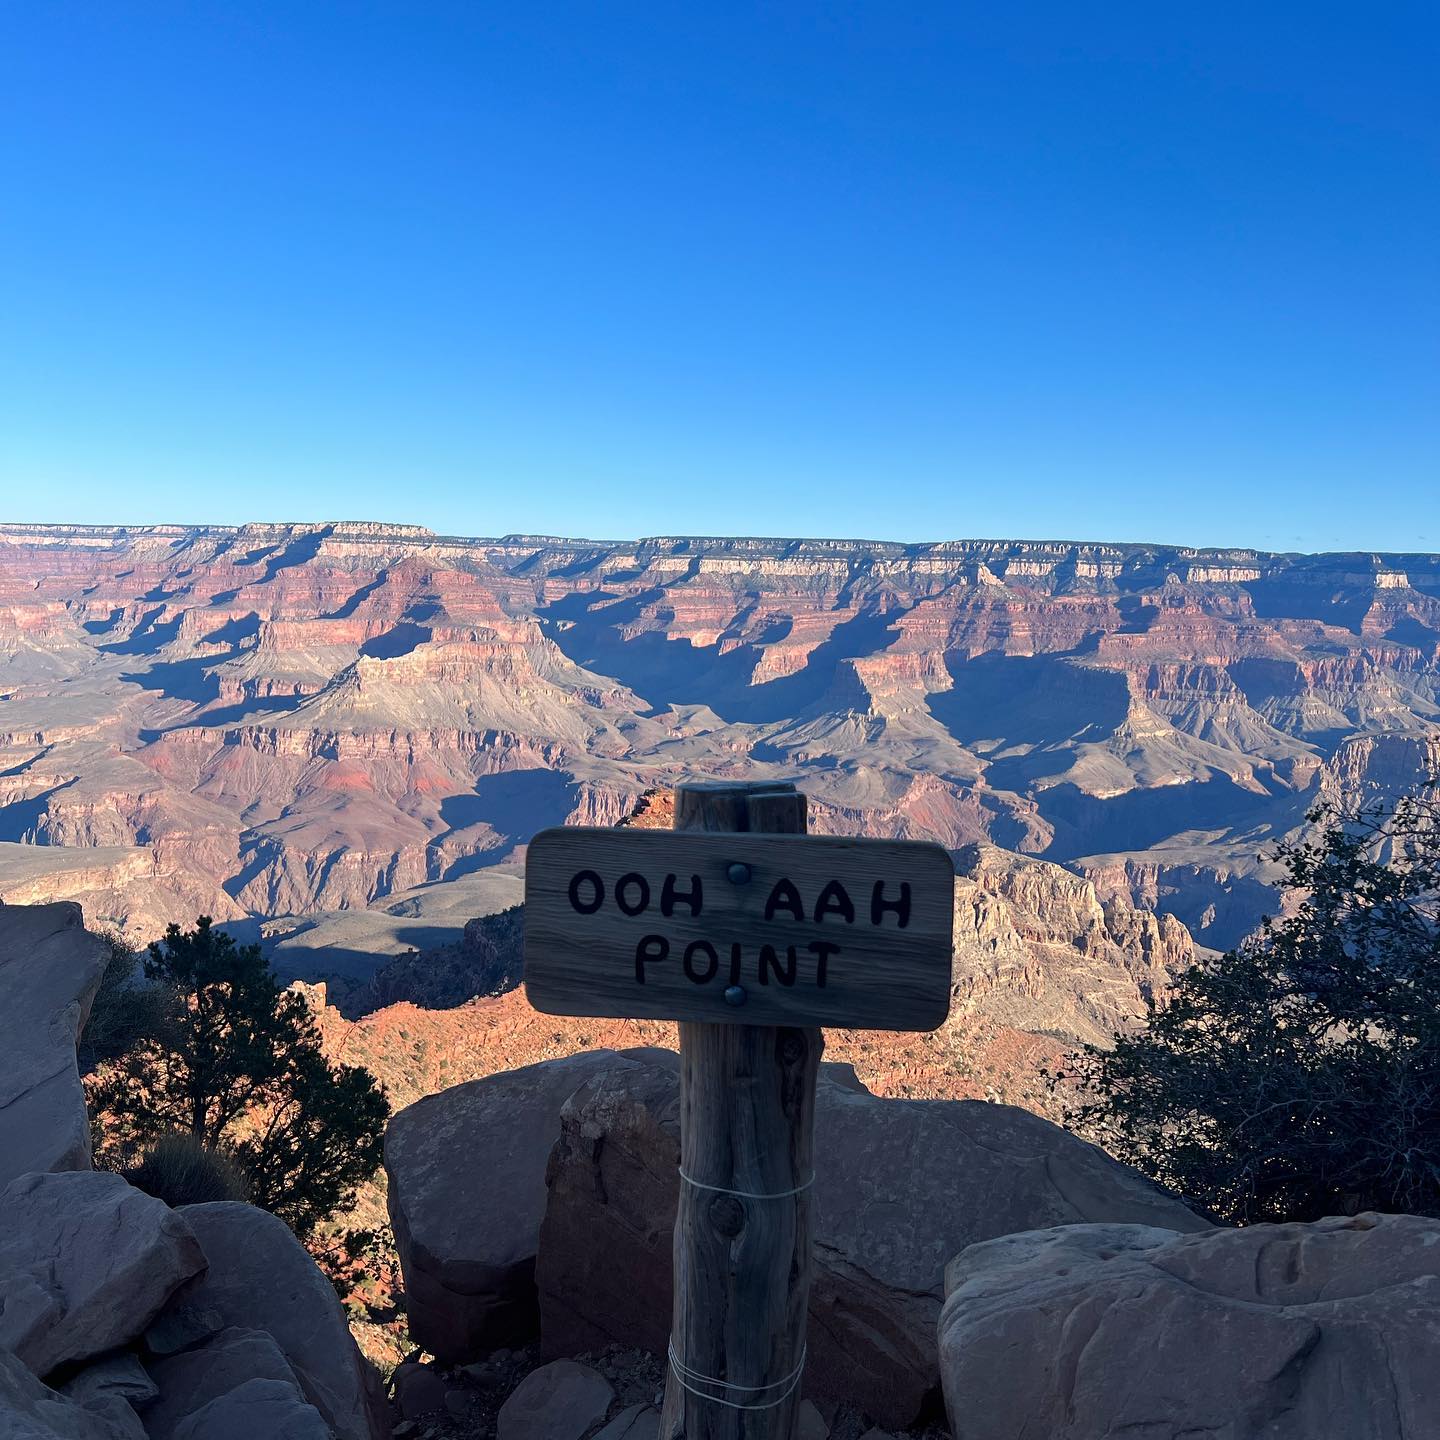 Photo dump from a truly epic weekend. Hiking the Grand Canyon down and out in 1 day…18 miles…was truly an unforgettable experience. 

#grandcanyon #grandcanyonnatonalpark #southkaibab #brightangel #phantomranch #arizona